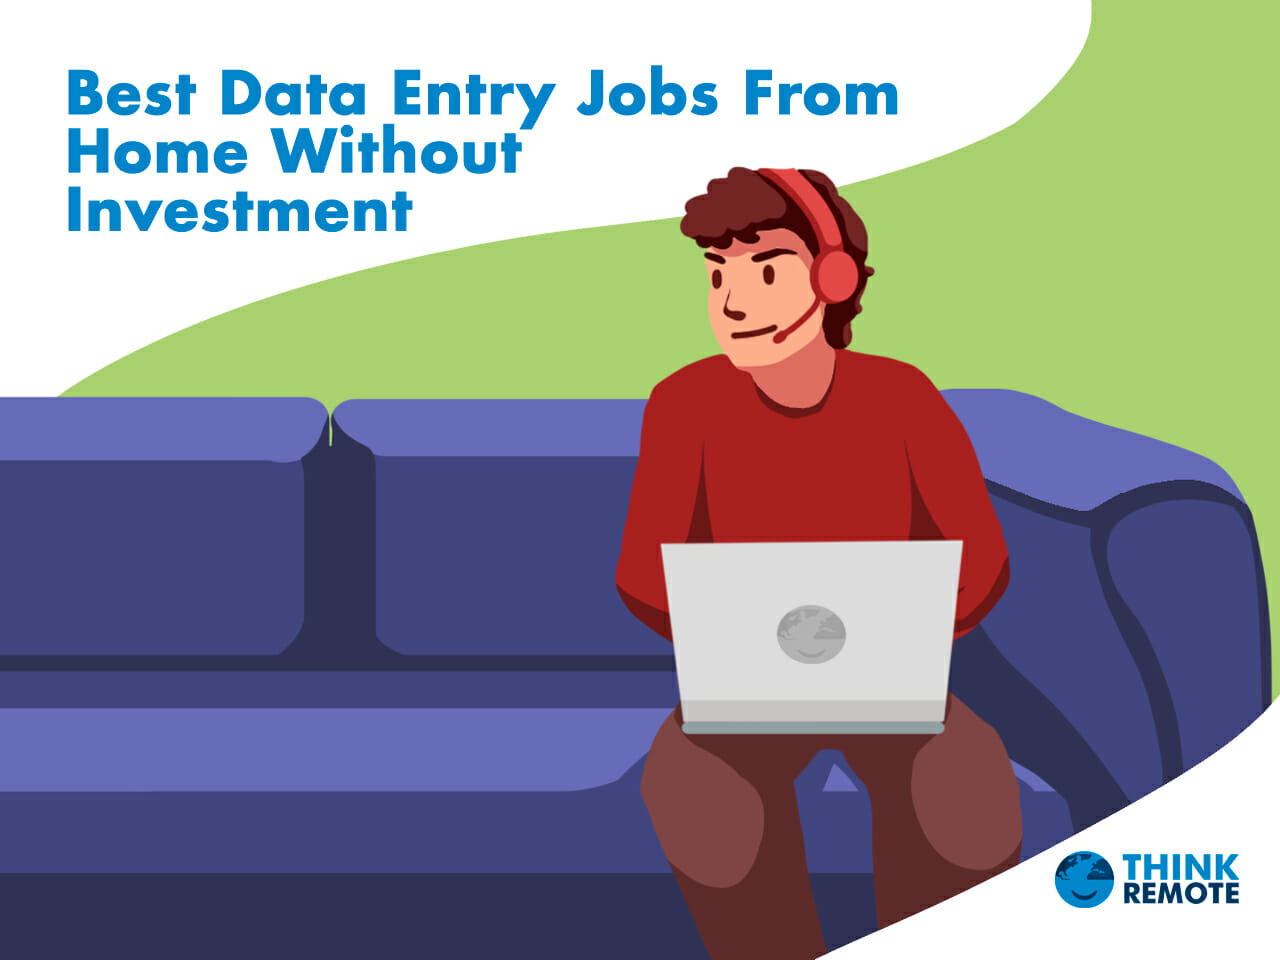 online data entry jobs websites without investment